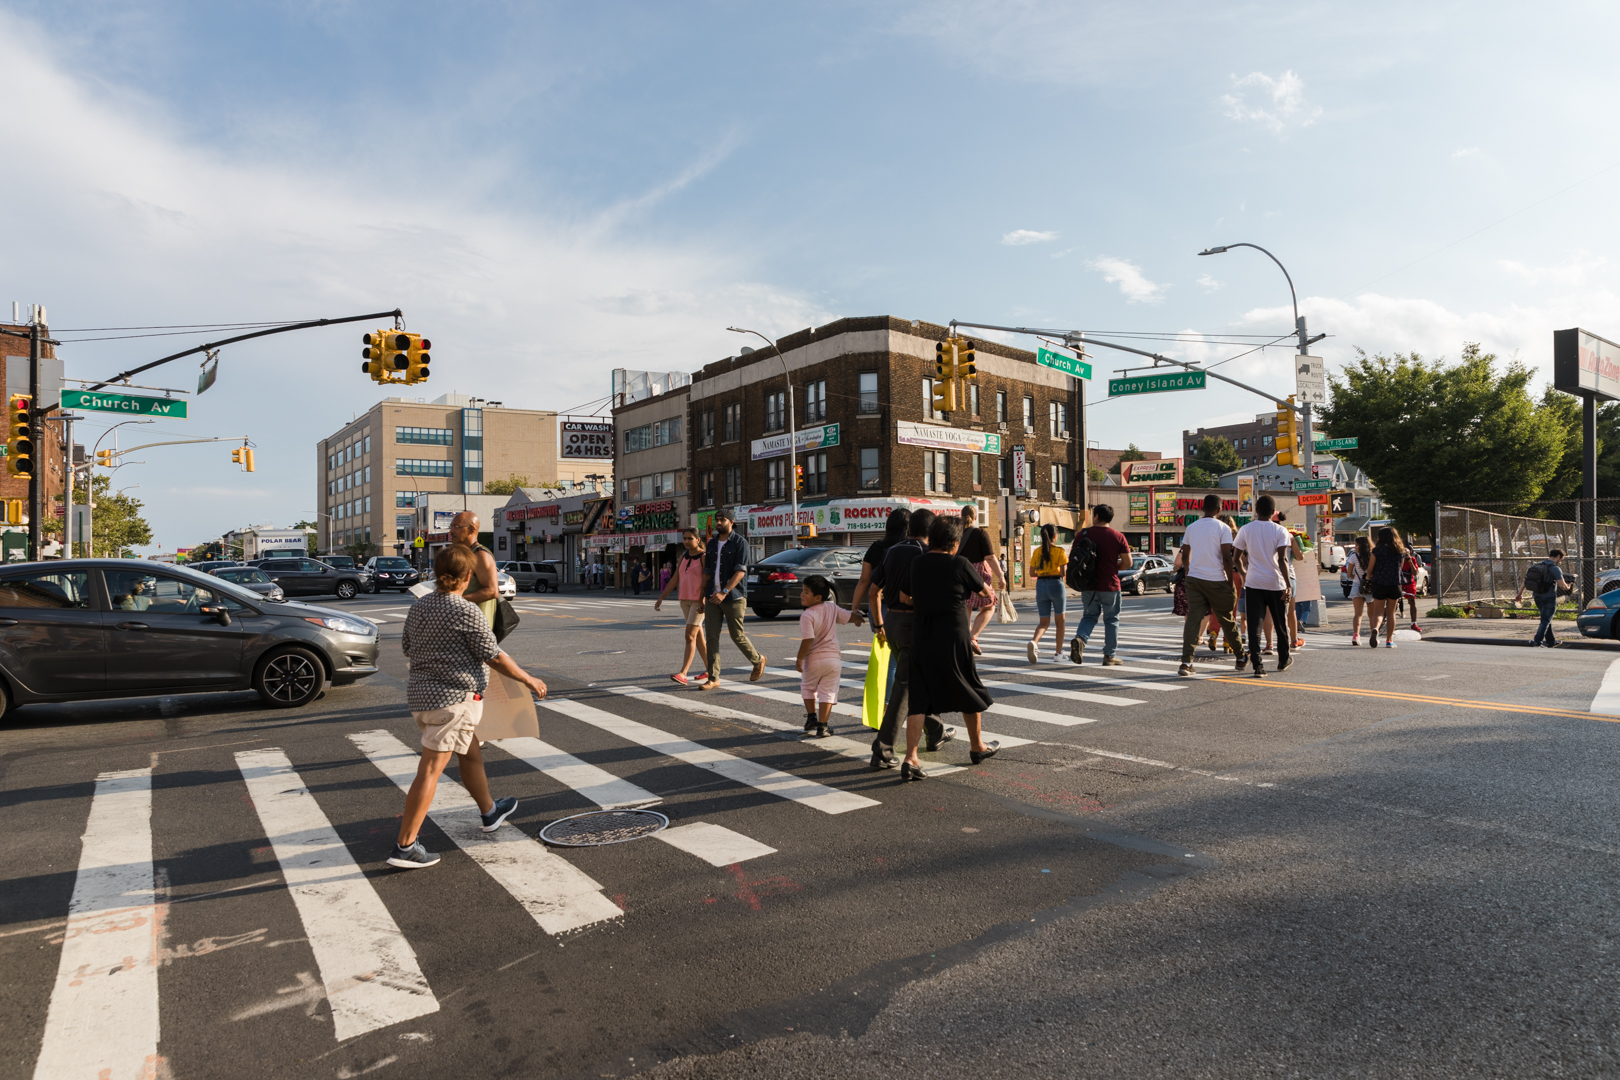 The intersection of Coney Island and Church avenues in Kensington. Eagle photo by Paul Frangipane